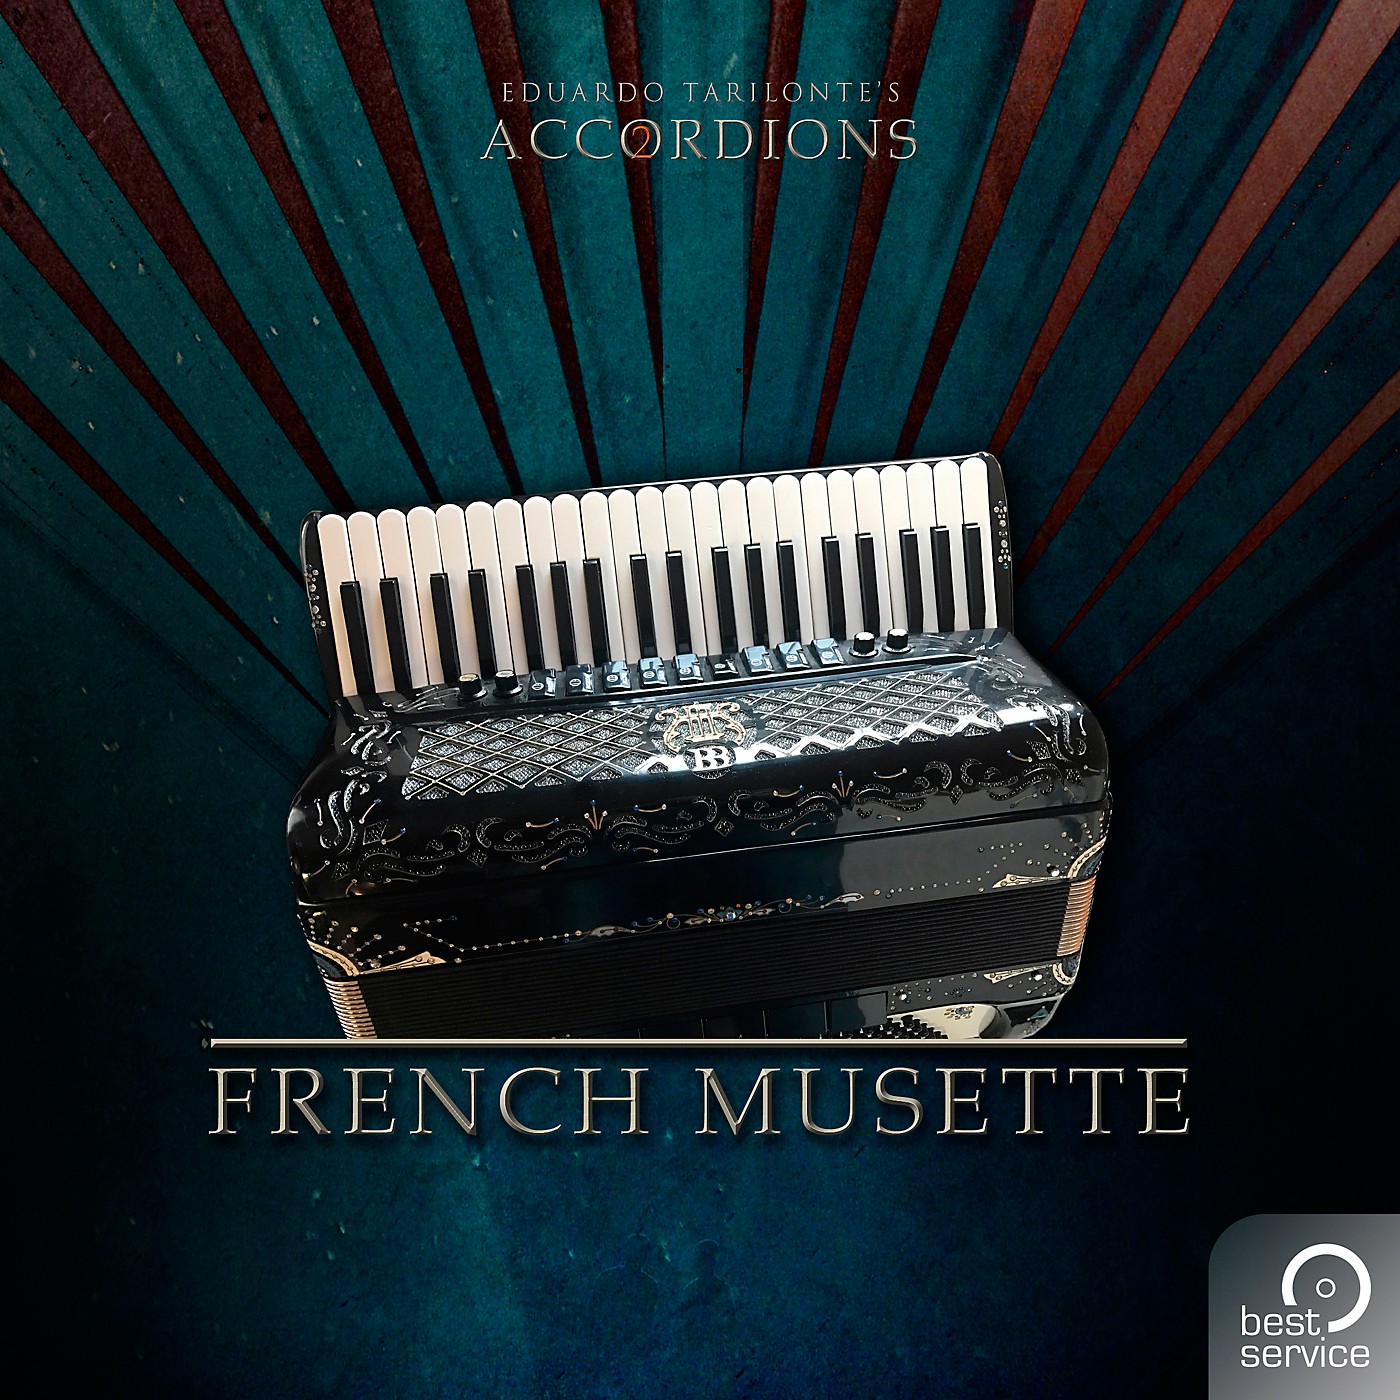 Best Service Accordions 2 - Single French Musette thumbnail